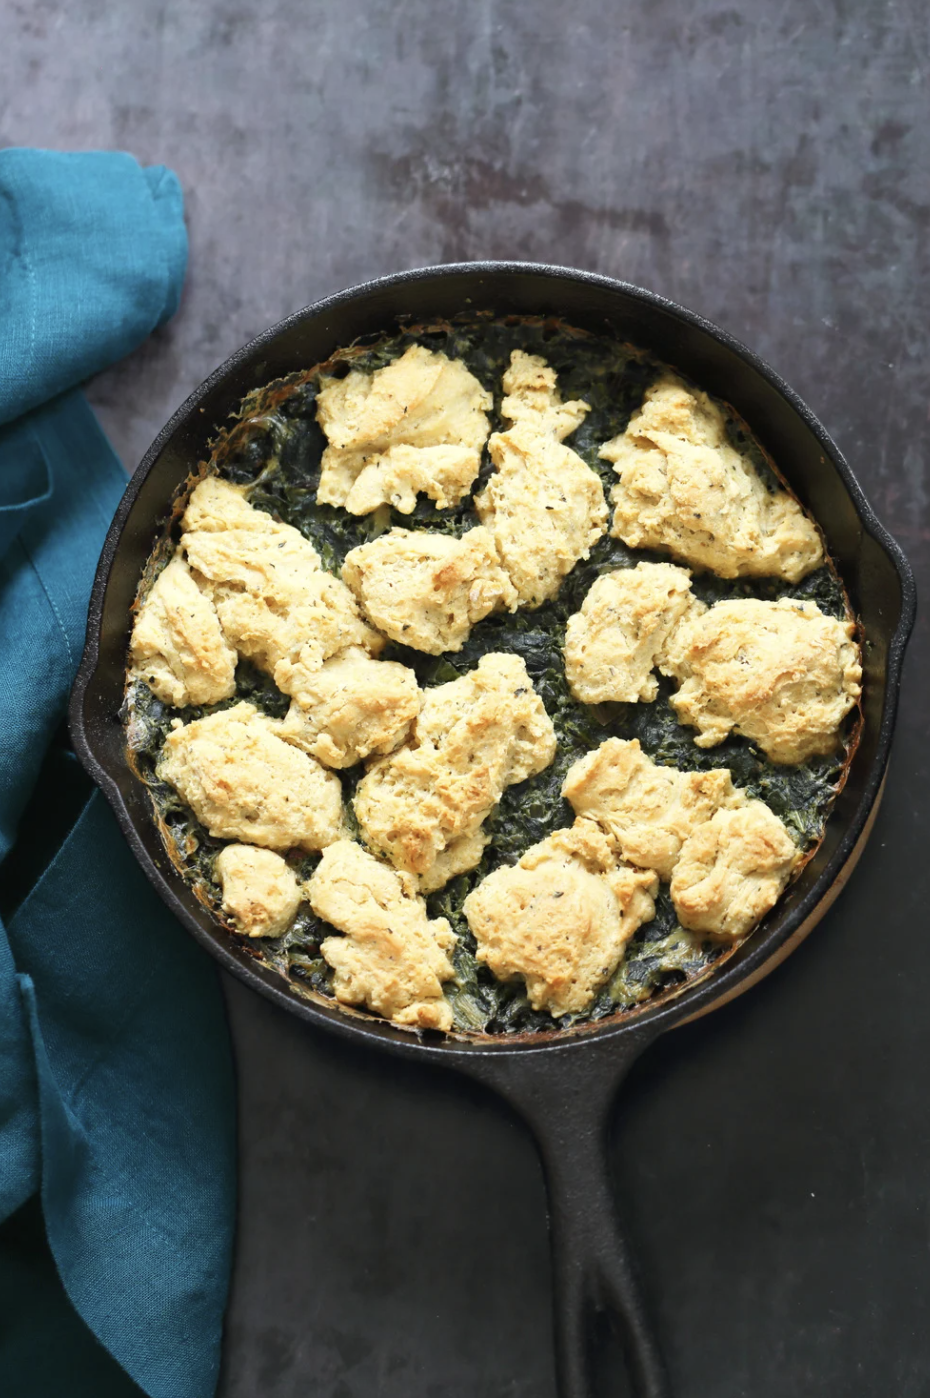 11) Vegan Creamed Spinach With Biscuit Topping